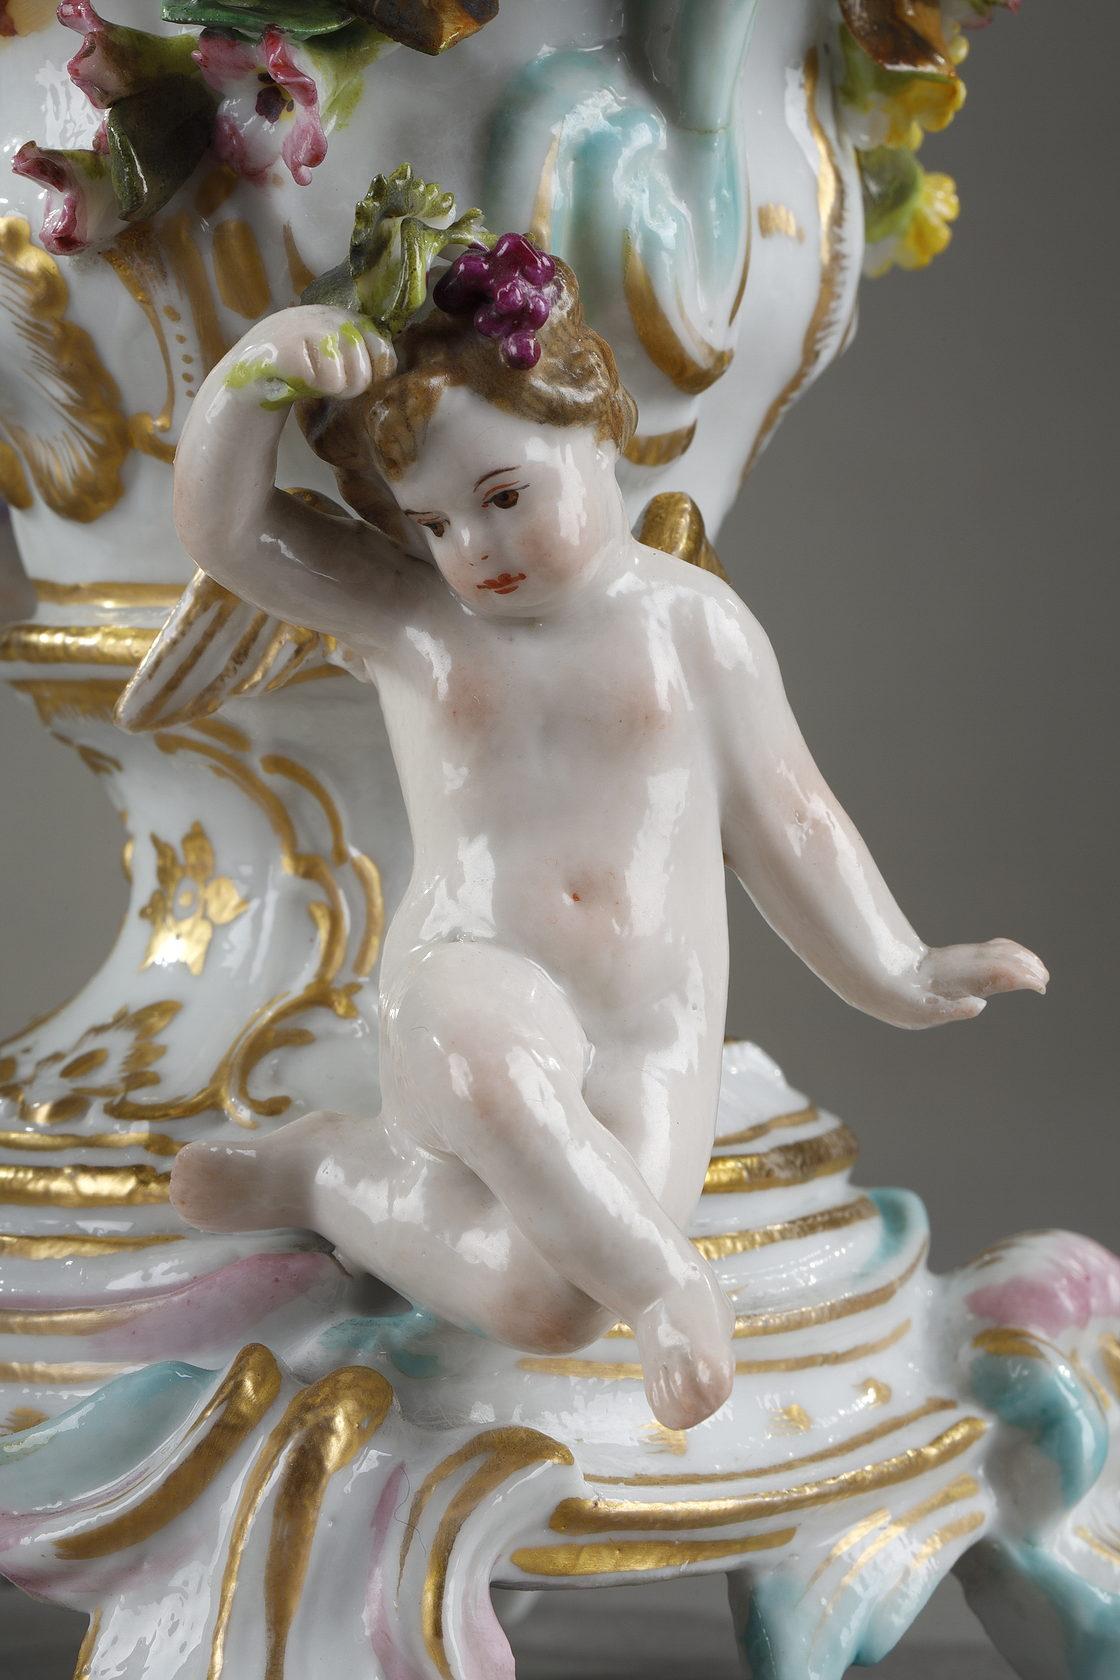 Early 19th Century Pair of Polychrome and Gilt Porcelains from the Meissen Manufacture